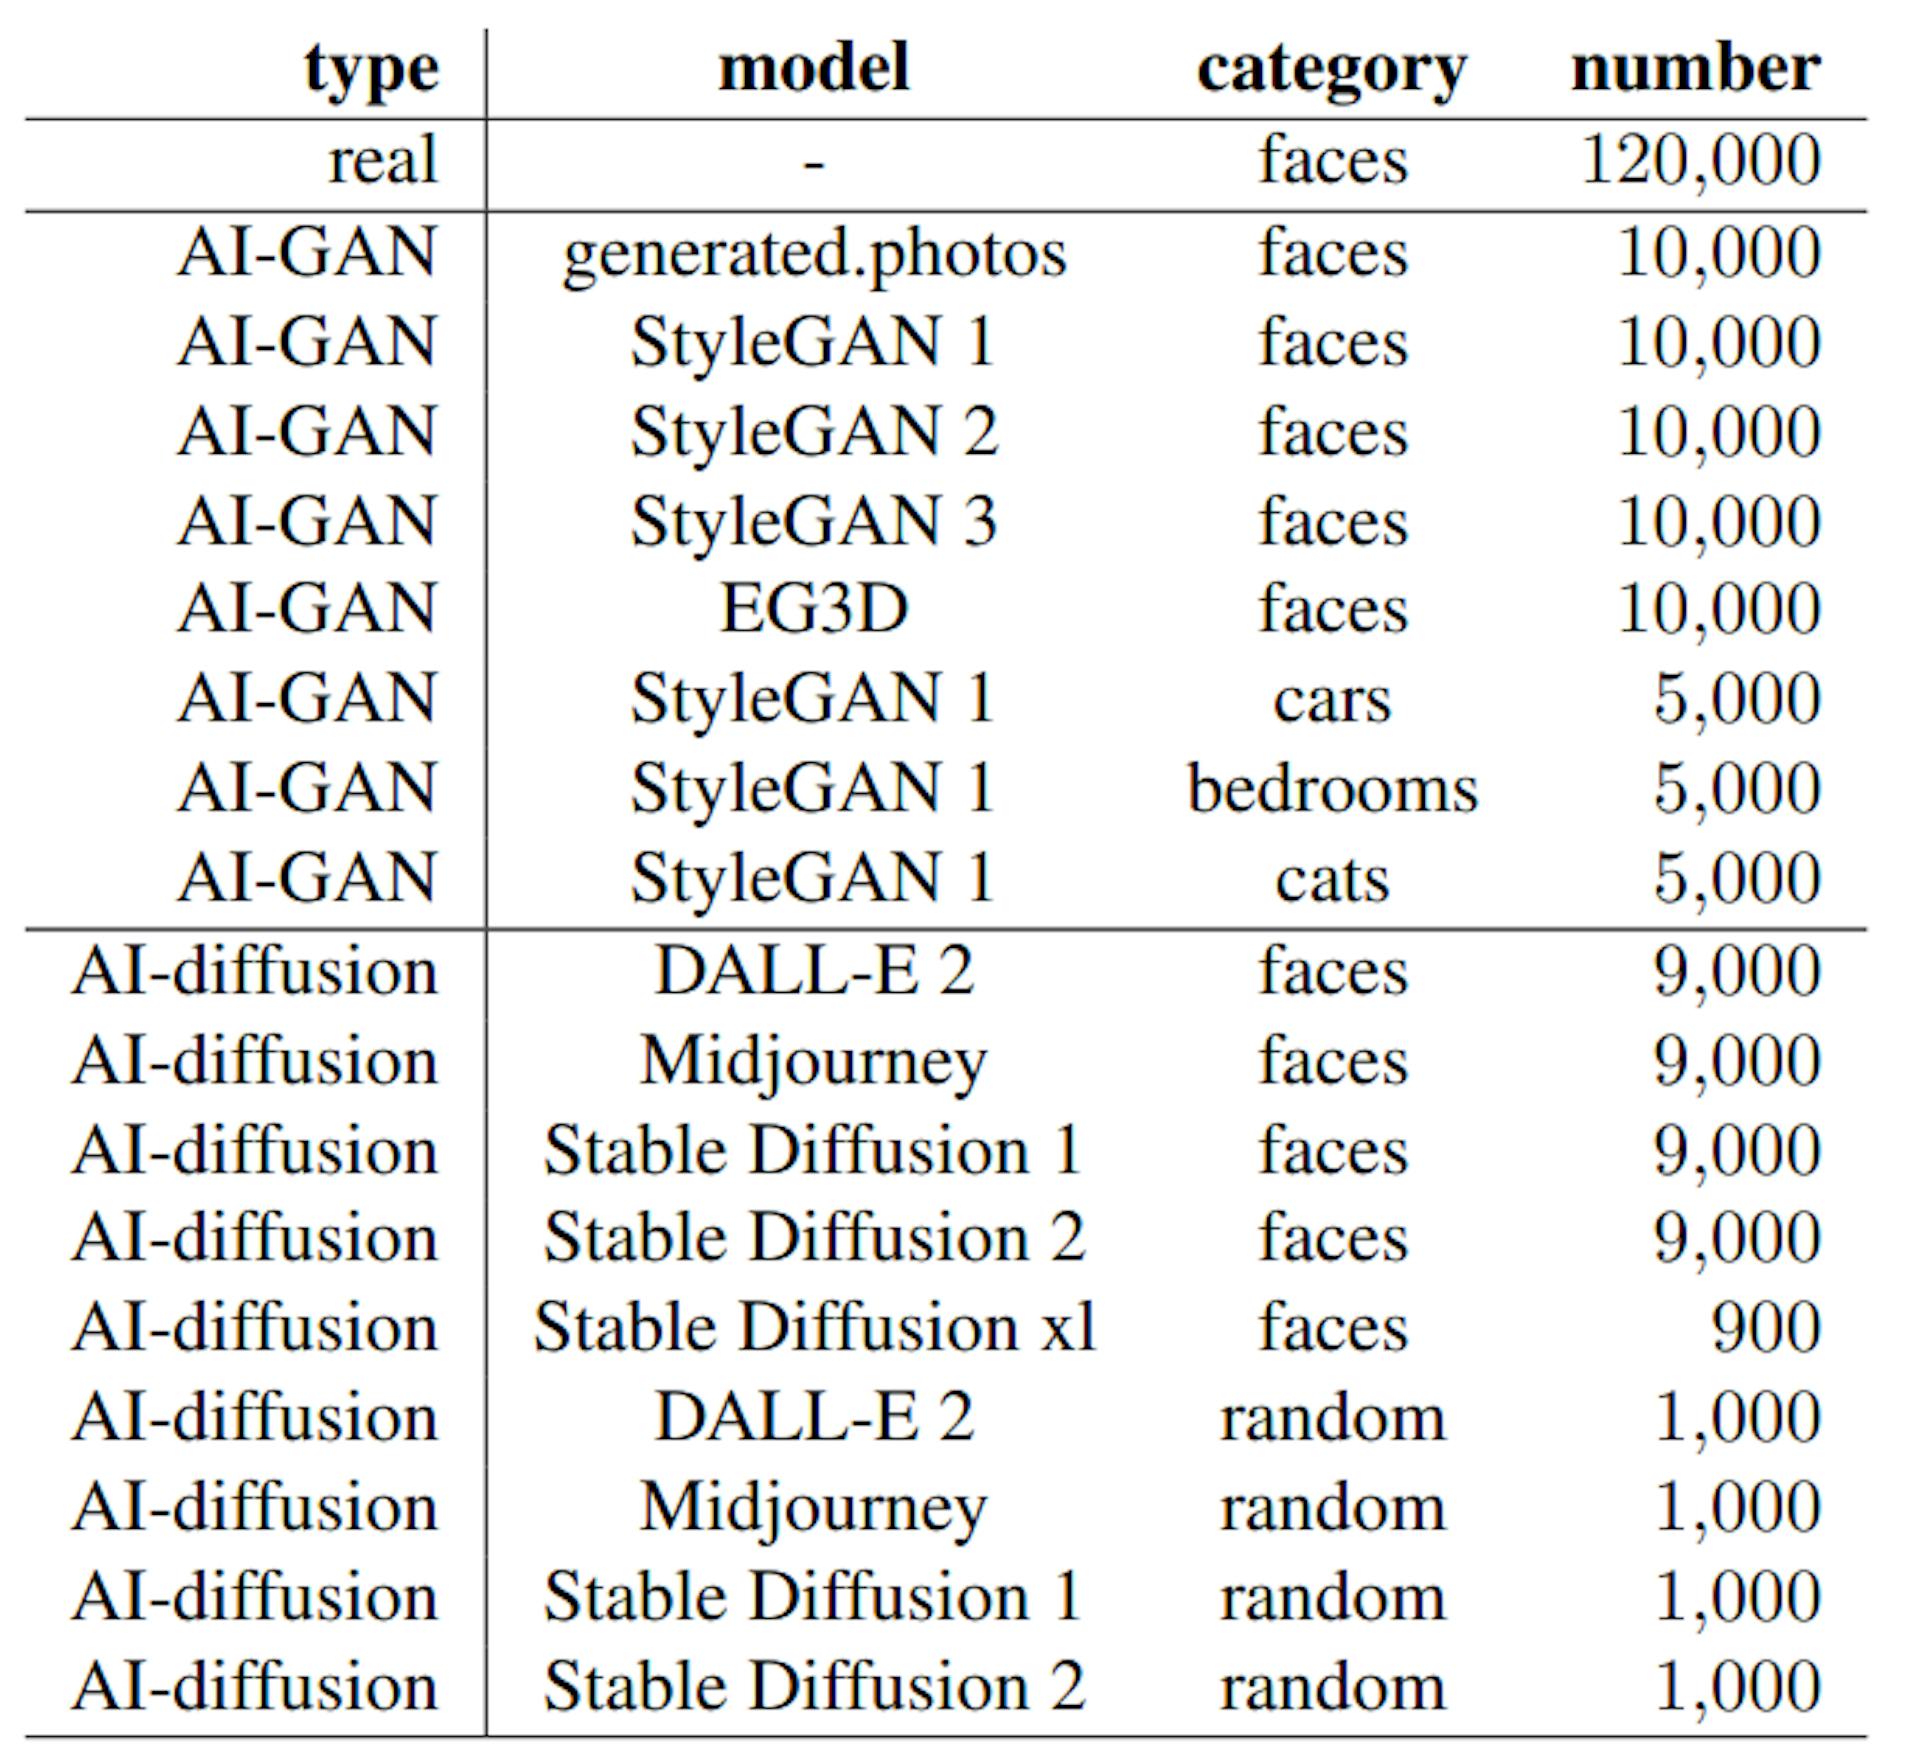 Table 1. A breakdown of the number of real and AI-generated images used in our training and evaluation (see also Figure 2).